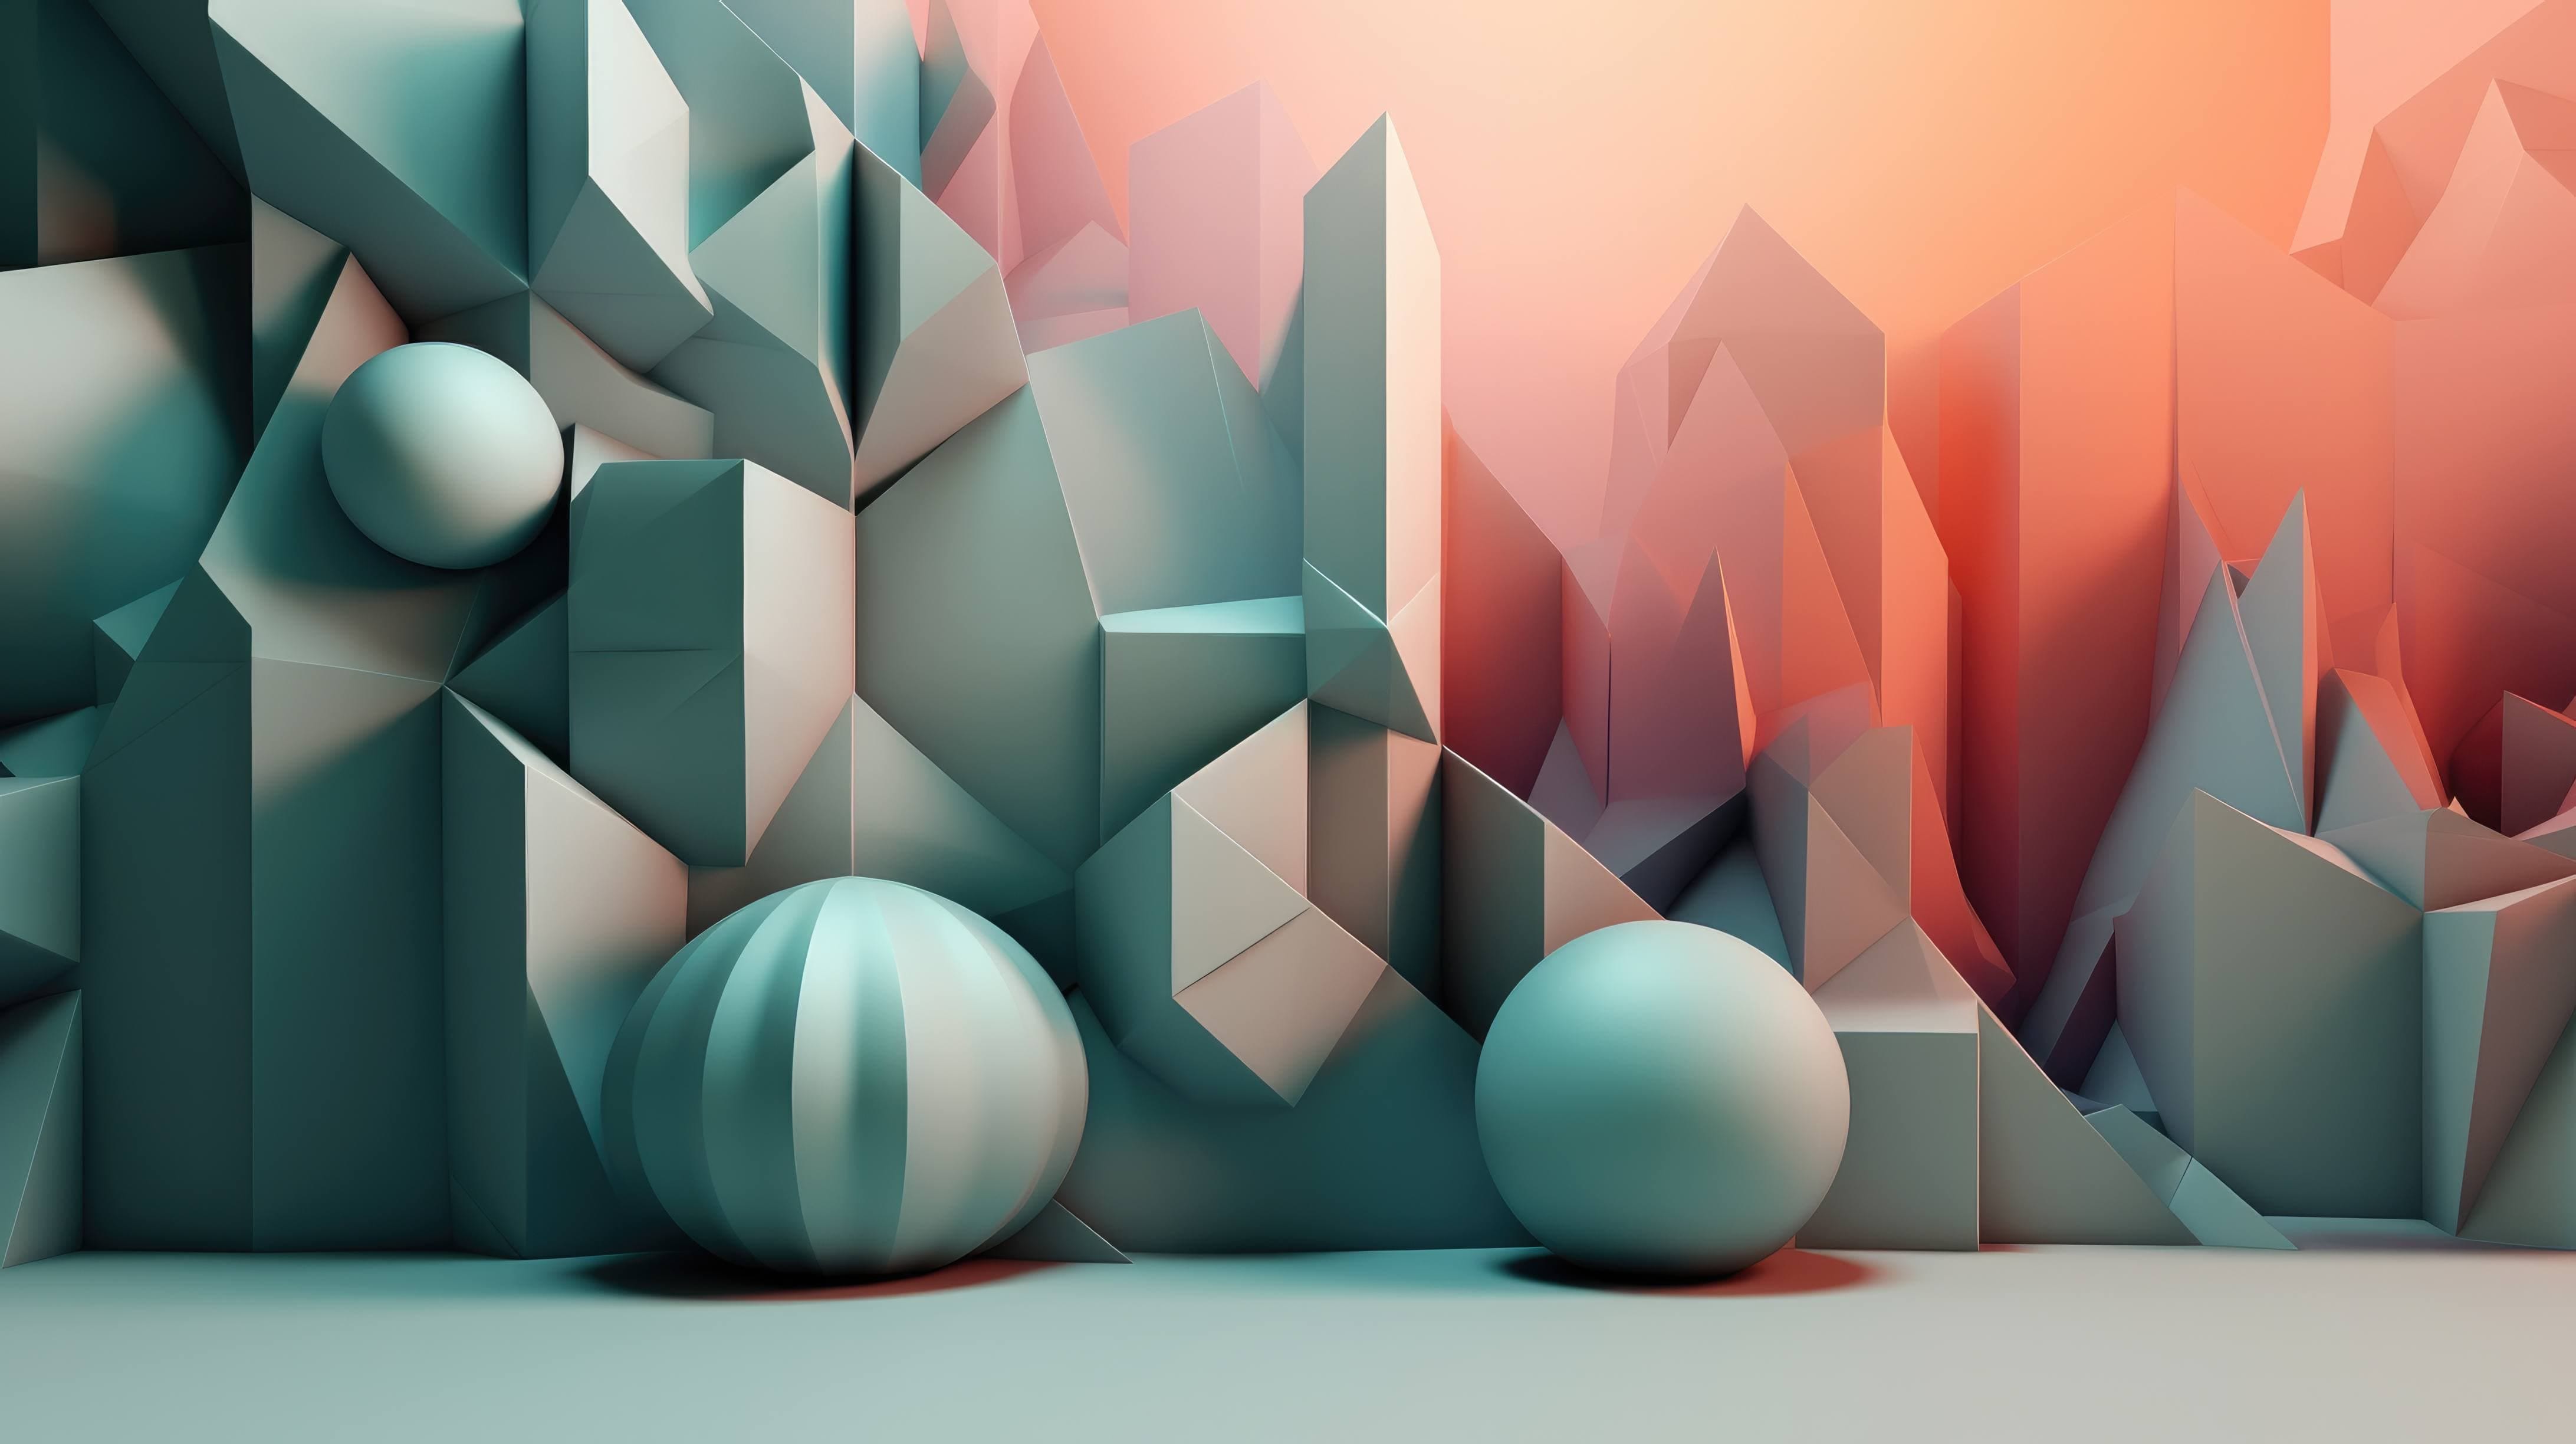 This 3D abstract design features a minimalist and elegant composition of geometric shapes and soft gradients, ideal for a sleek and modern desktop wallpaper